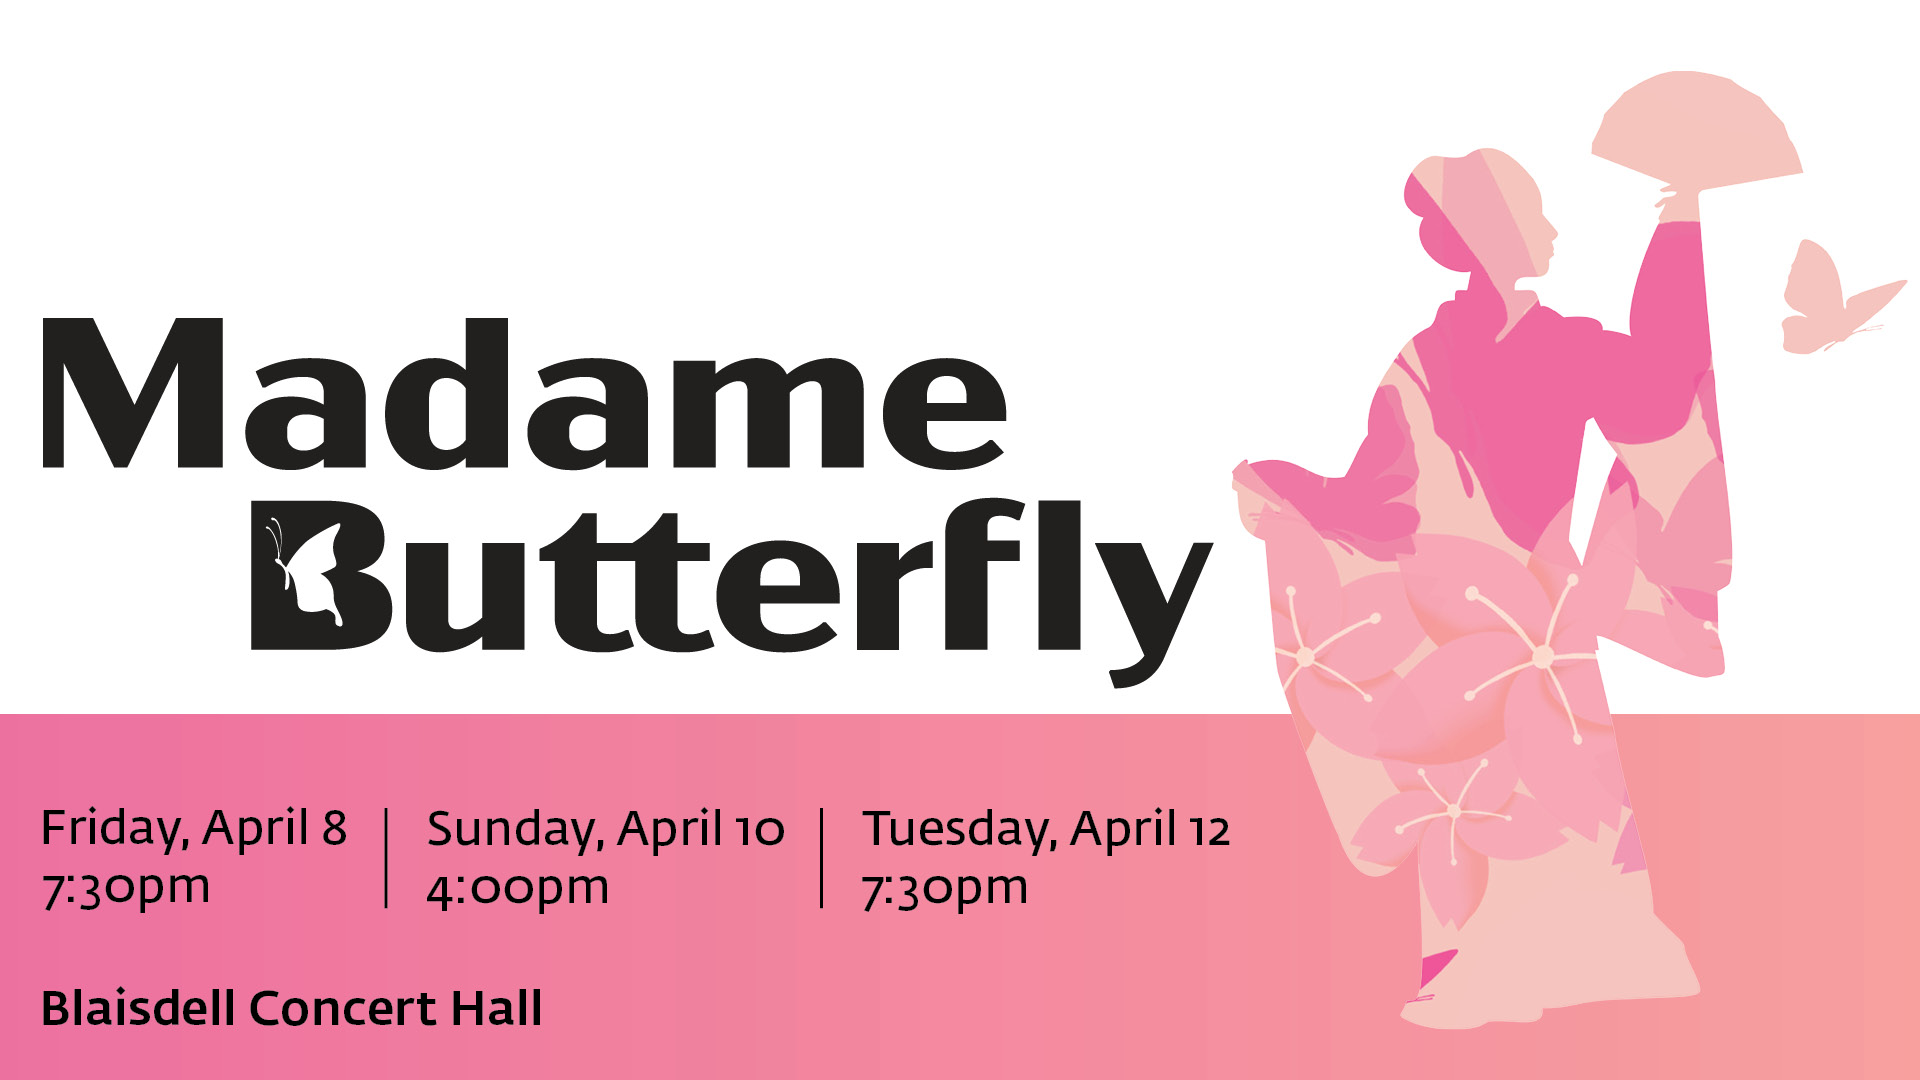 Silhouette of a female identifying geisha in a kimono holding a fan with the image of butterflies and cherry blossoms inside the shapes, the words Madame Butterfly, Friday April 8, 7:30pm, Sunday April 10, 4:00pm, Tuesday, April 12, 7:30pm, Blaisdell Concert Hall